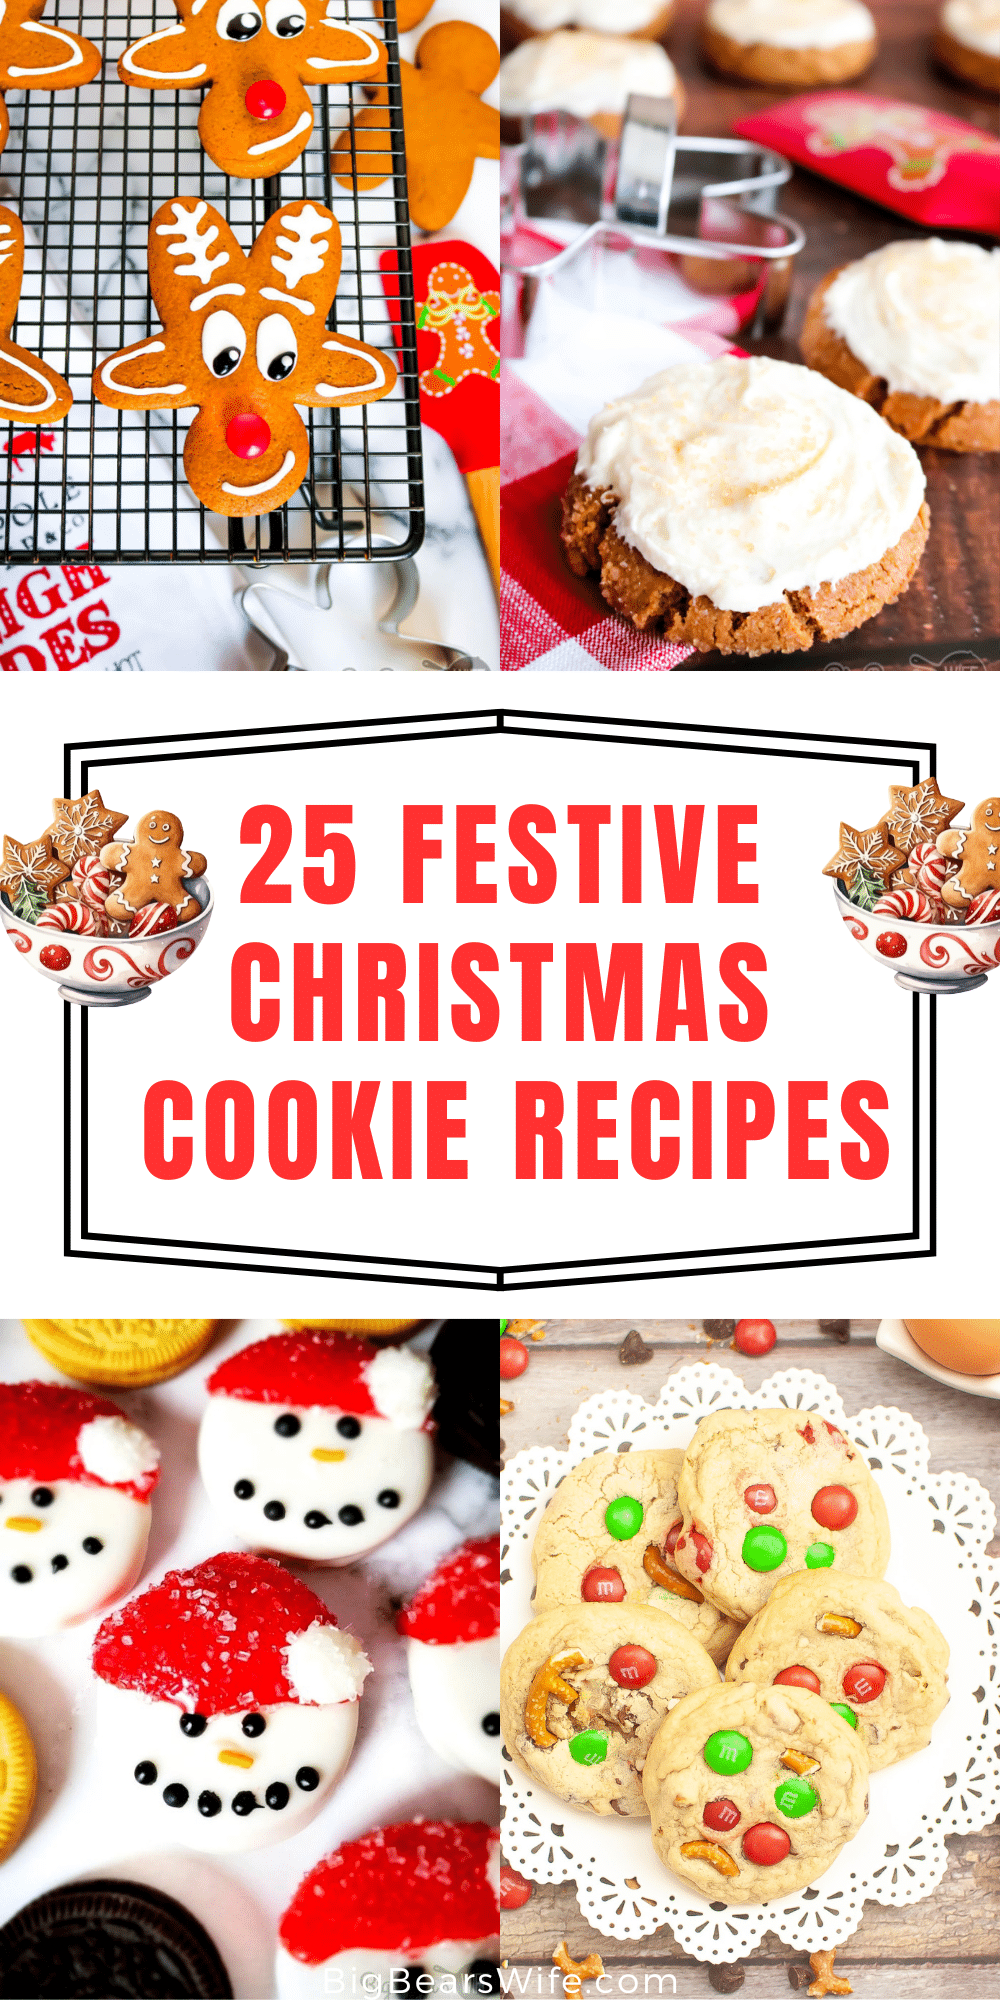 25 Festive Christmas Cookie Recipes – Get into the festive Holiday Spirit with 25 Festive Christmas Cookie Recipes perfect for dessert or gift-giving! via @bigbearswife